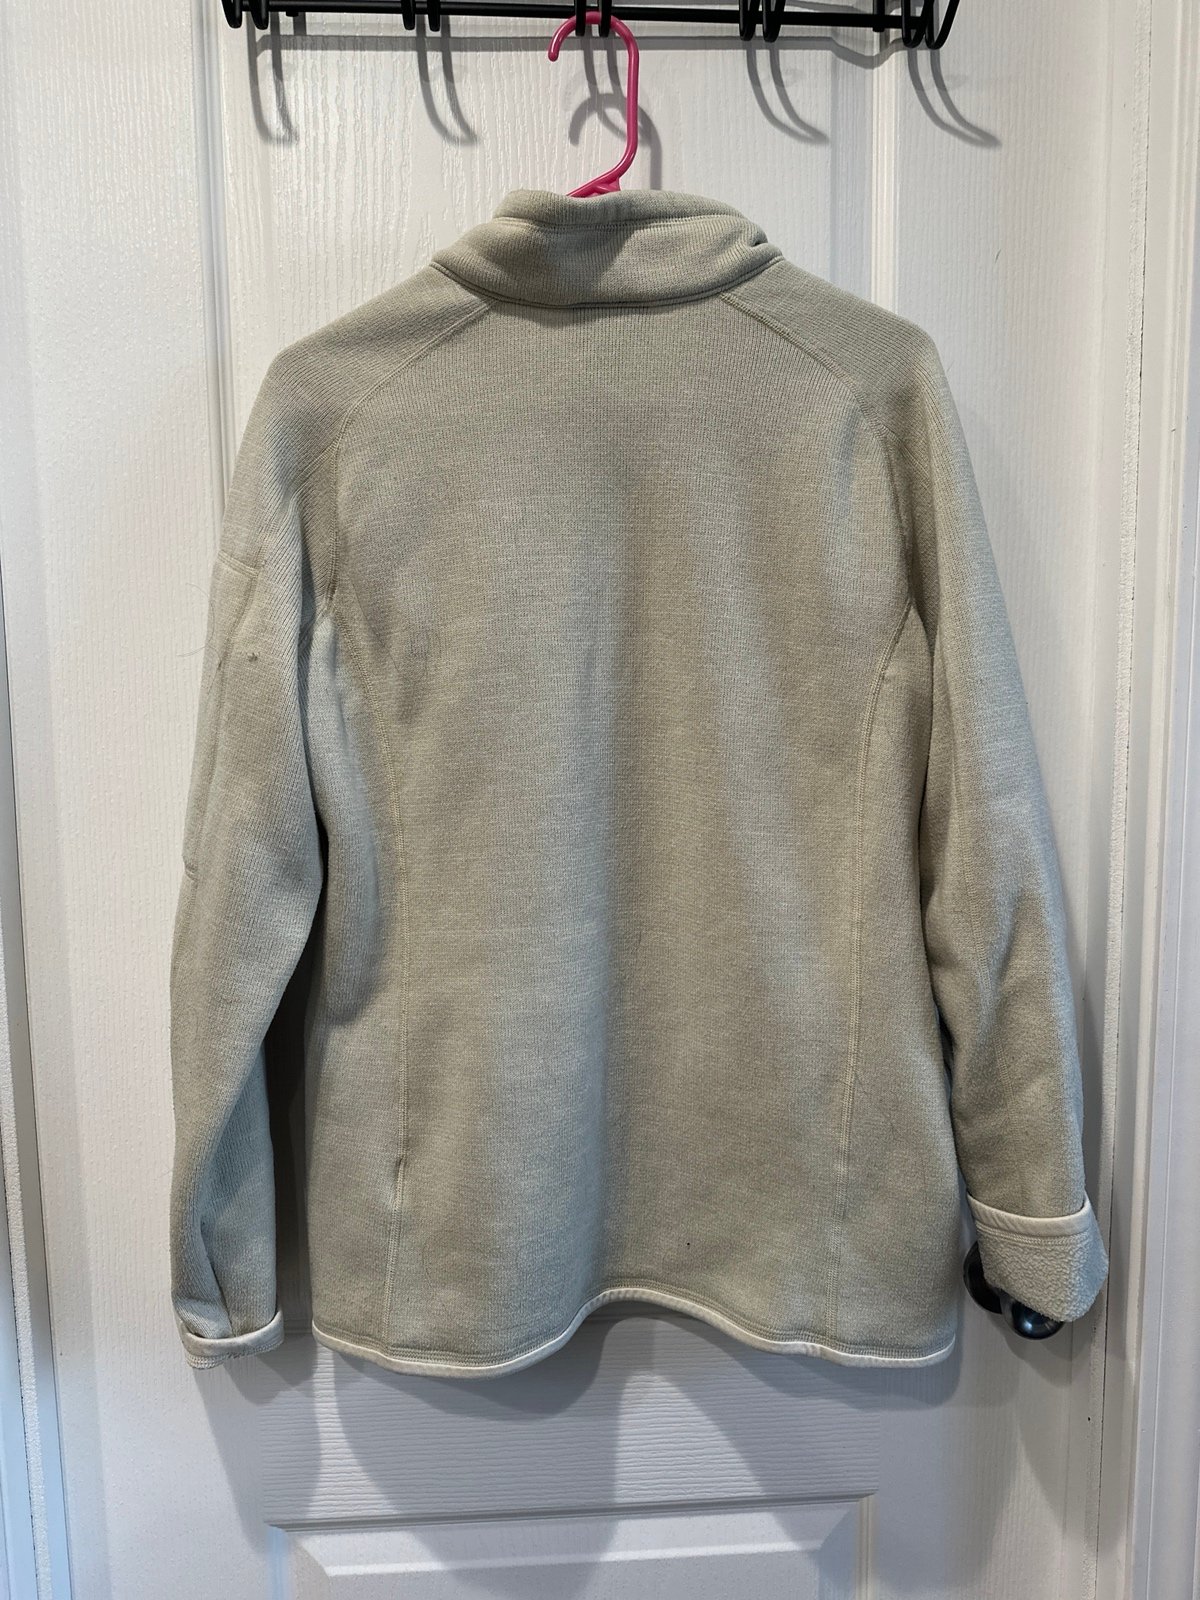 large selection Patagonia better sweater quarter zip fja8Qrn3m well sale